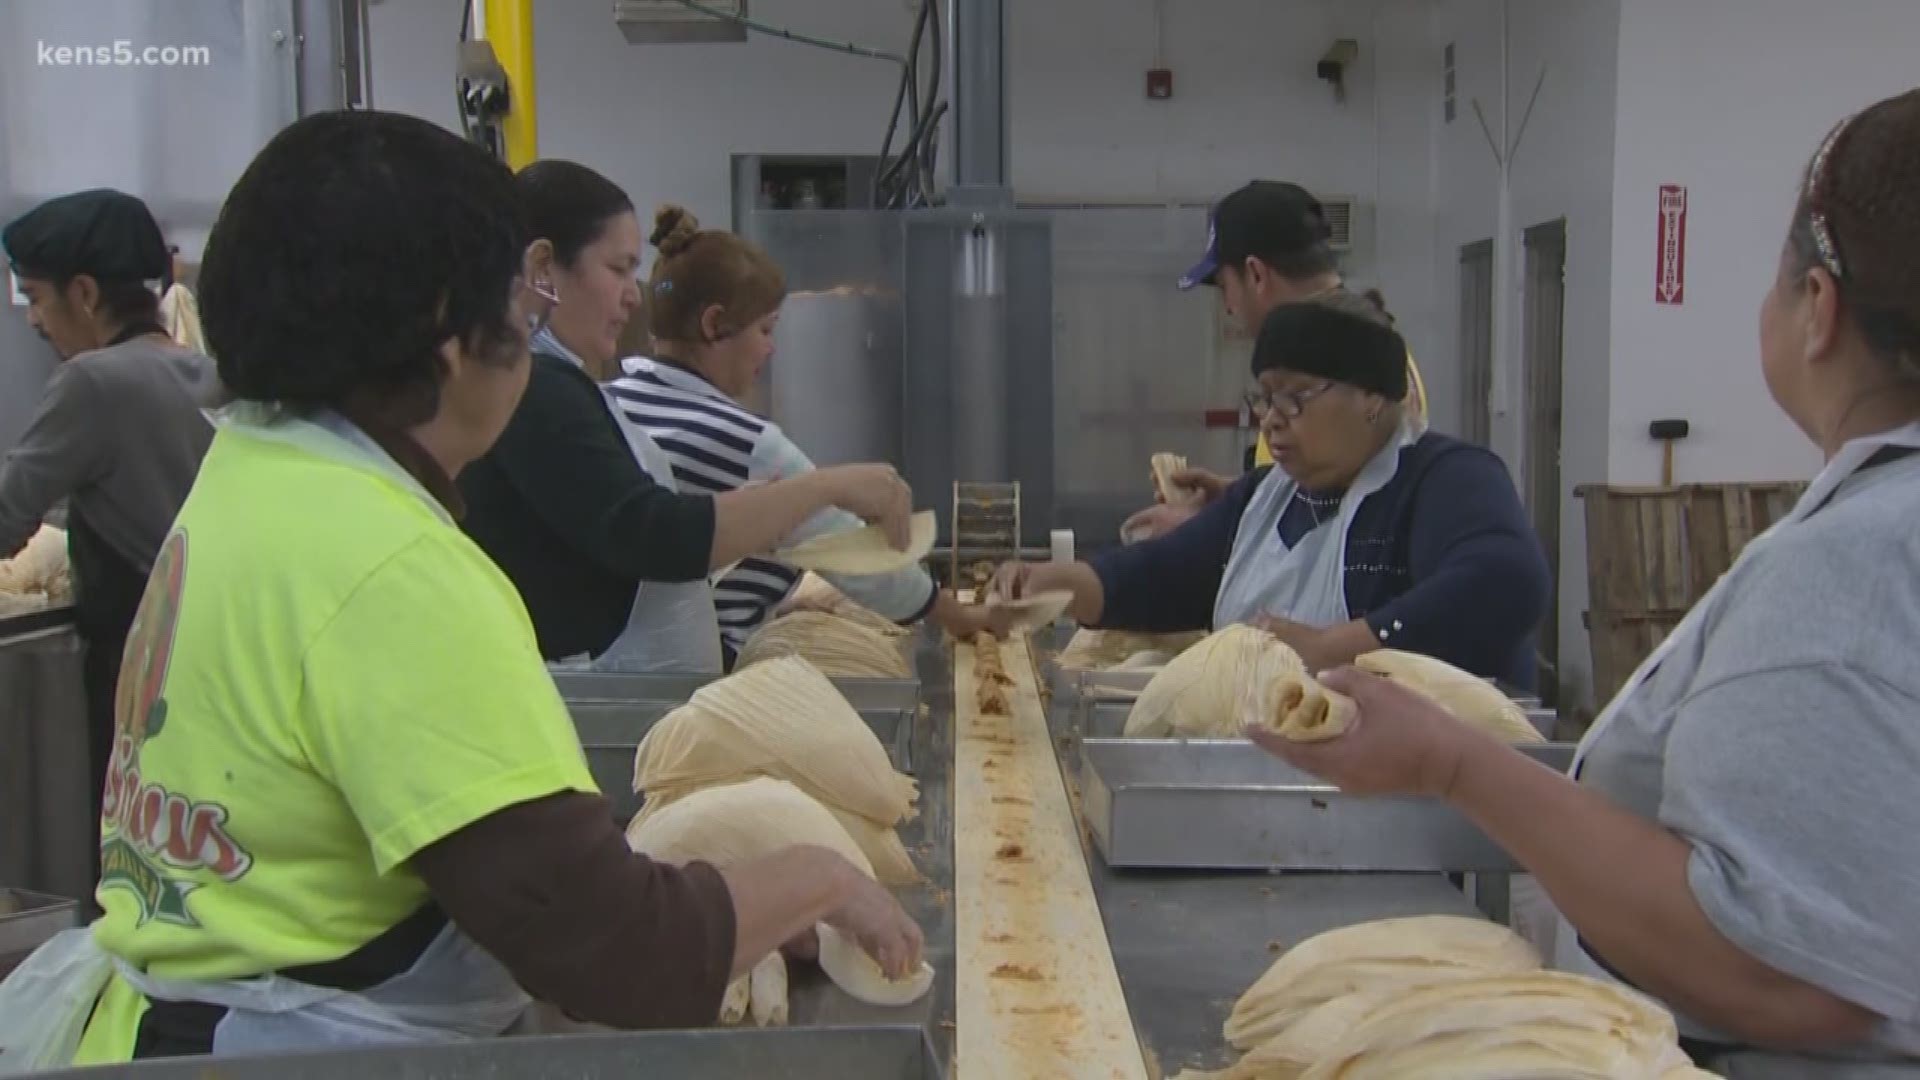 We got to know the people behind Delicious Tamales.